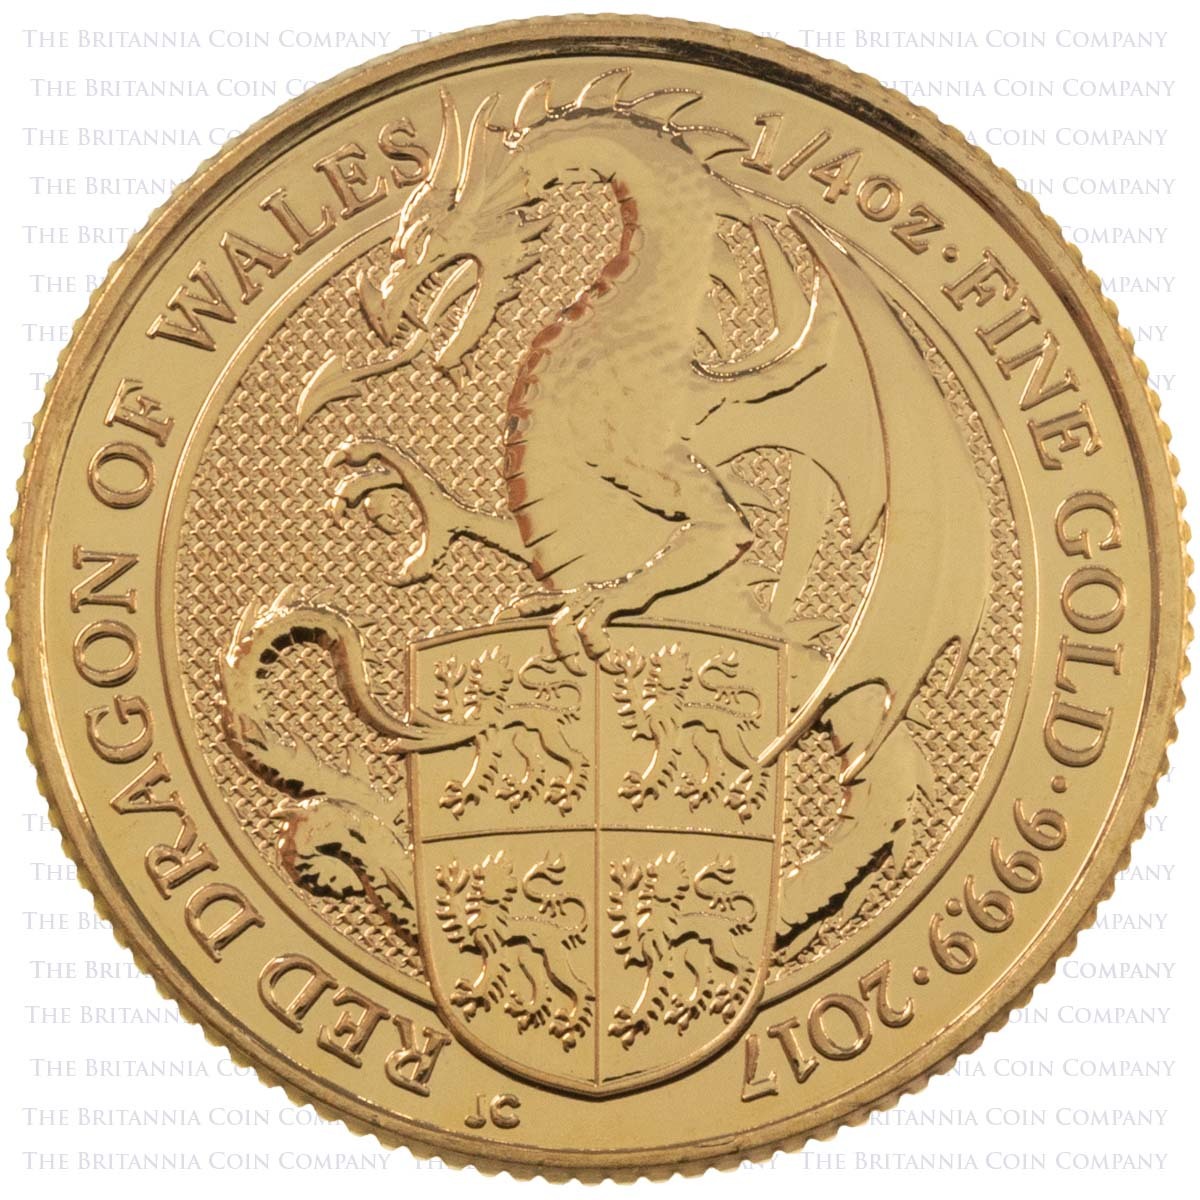 2017 Queen's Beasts Red Dragon Of Wales Quarter Ounce Gold Bullion Coin Reverse